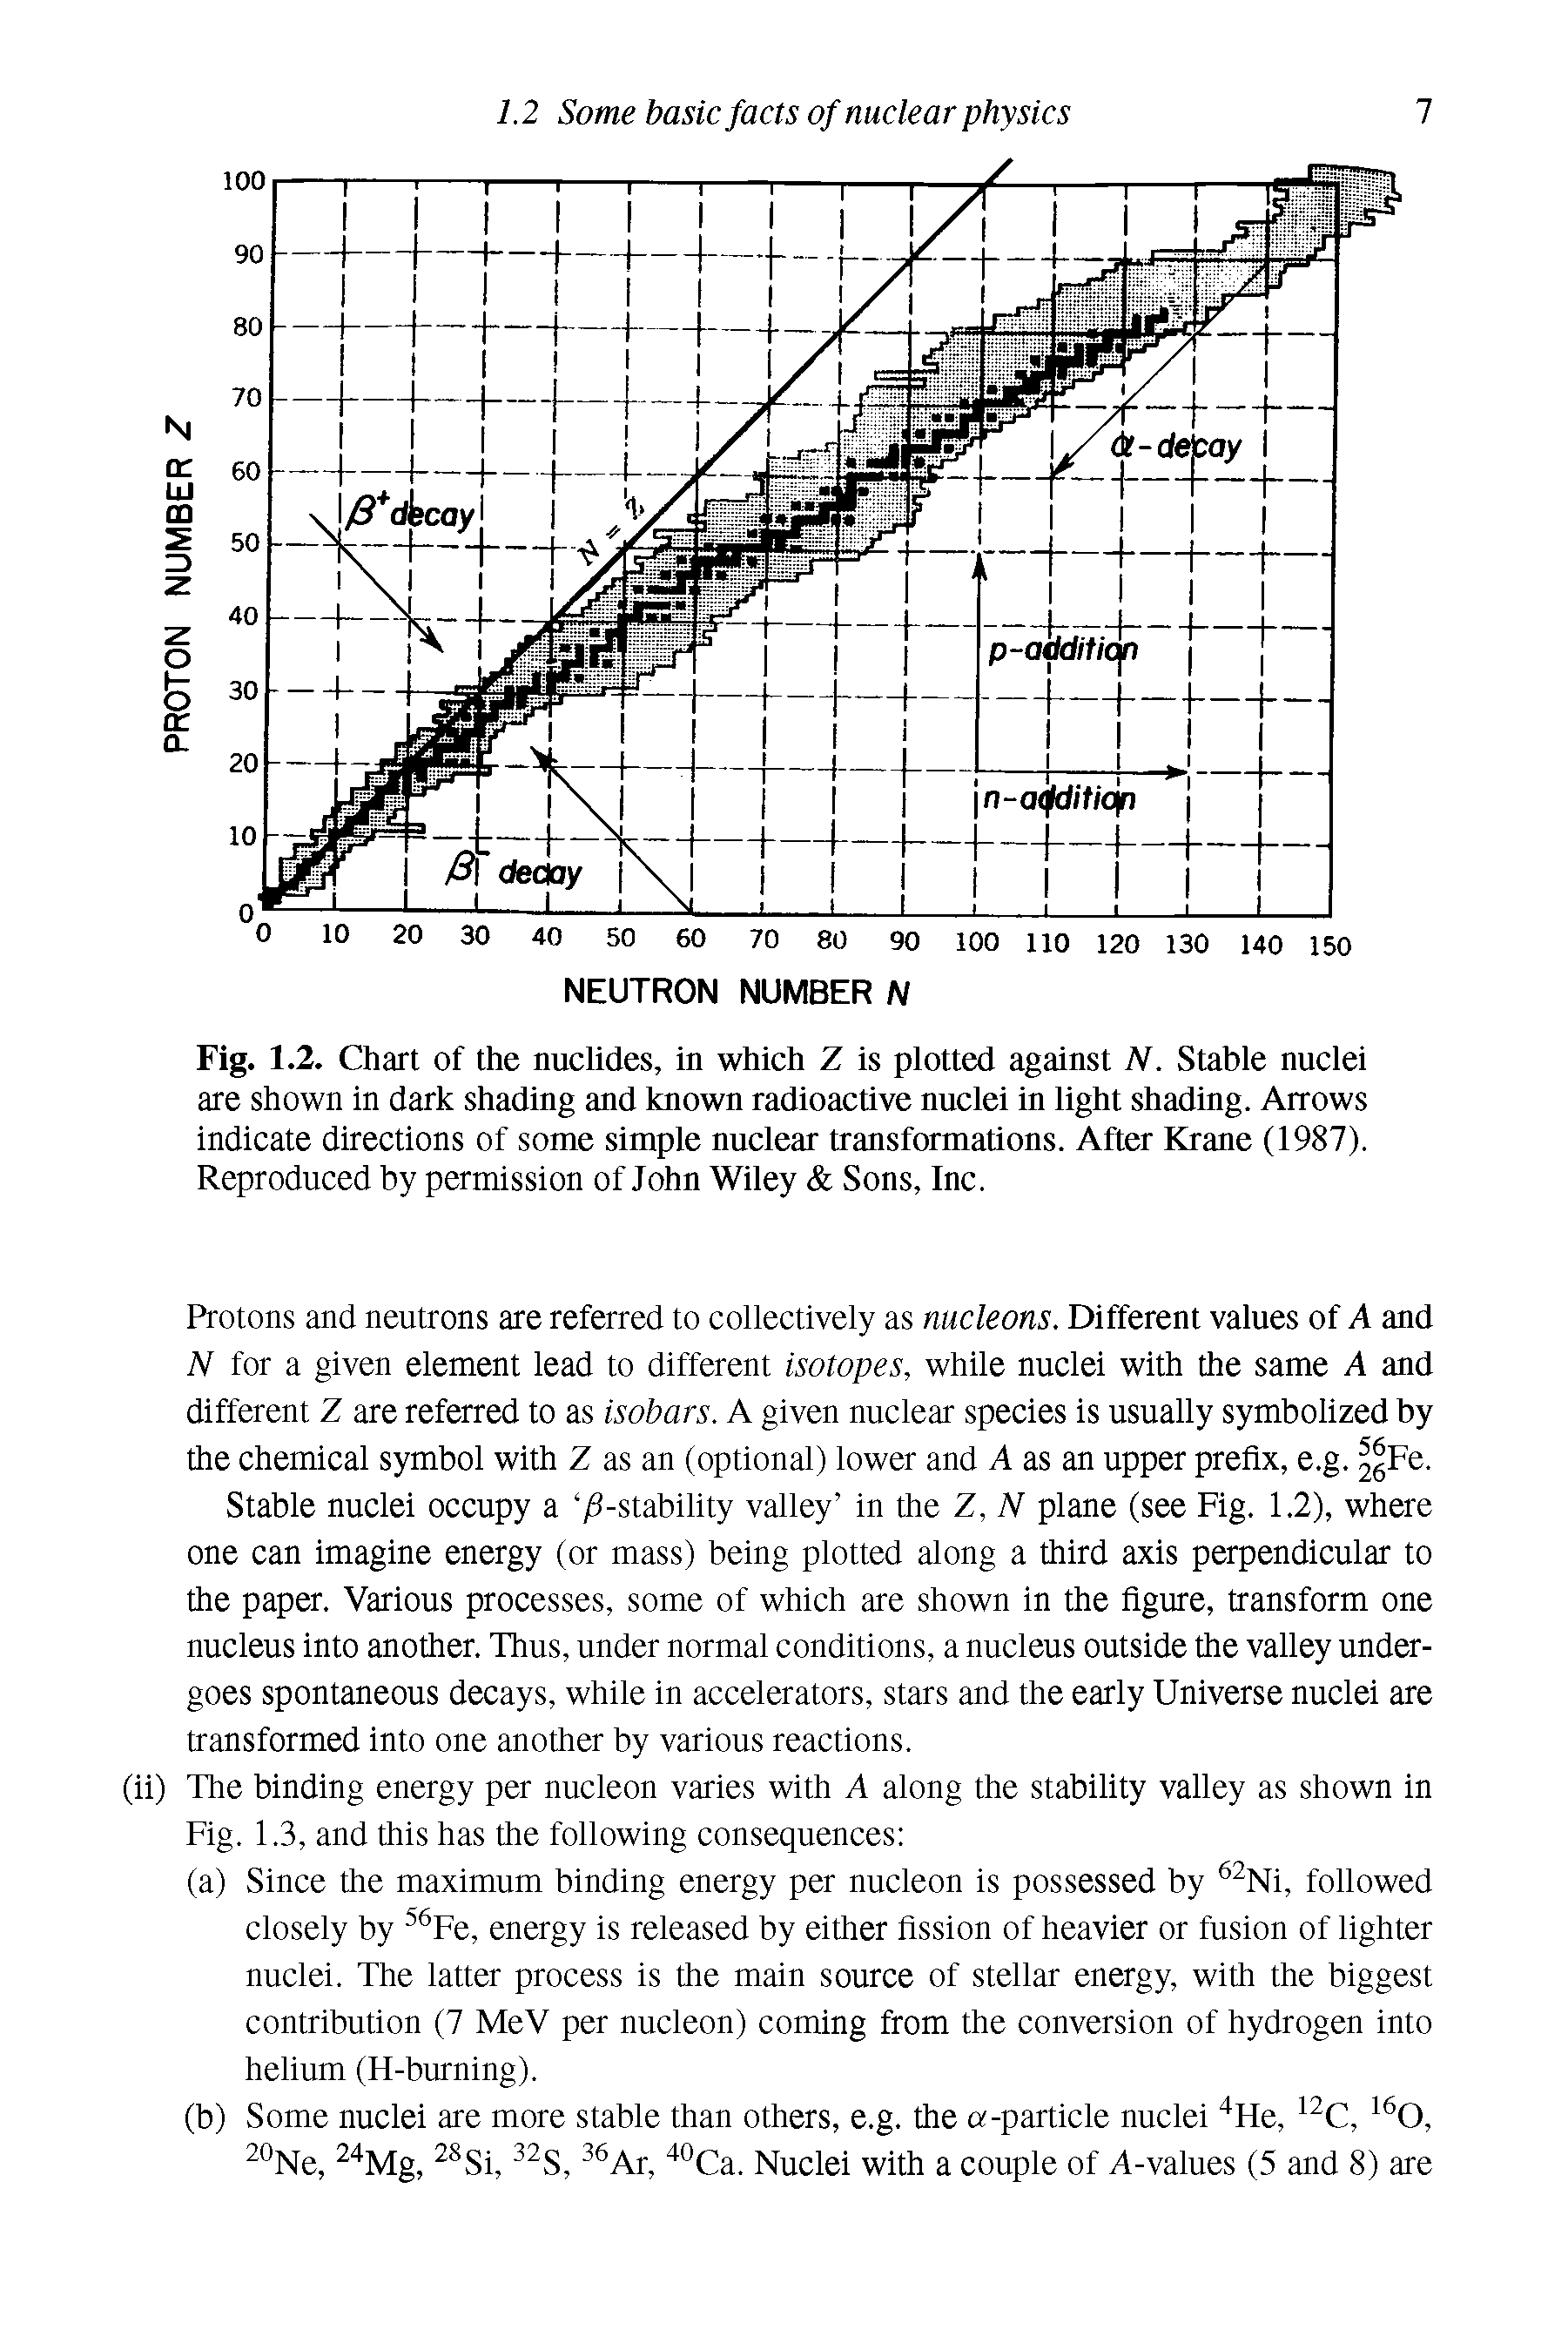 Fig. 1.2. Chart of the nuclides, in which Z is plotted against N. Stable nuclei are shown in dark shading and known radioactive nuclei in light shading. Arrows indicate directions of some simple nuclear transformations. After Krane (1987). Reproduced by permission of John Wiley Sons, Inc.